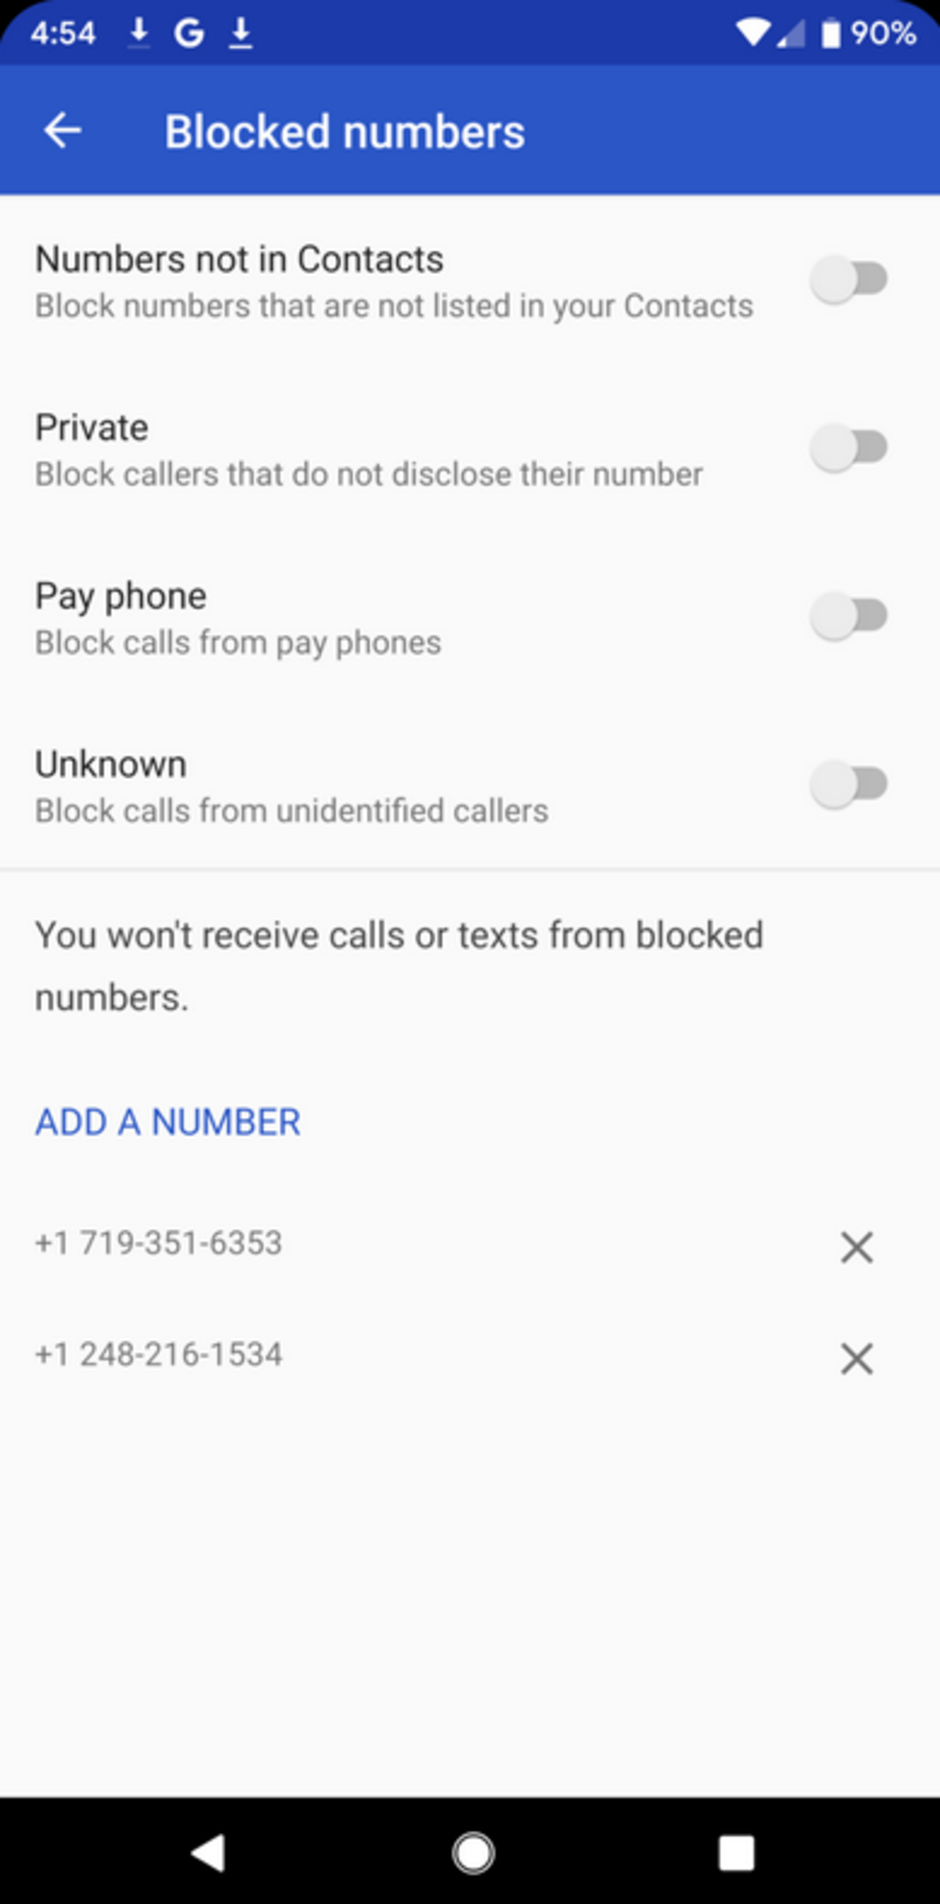 New settings page shows options that Android users might soon have to guard against scam calls - New feature coming to Android can stop you from getting ripped off